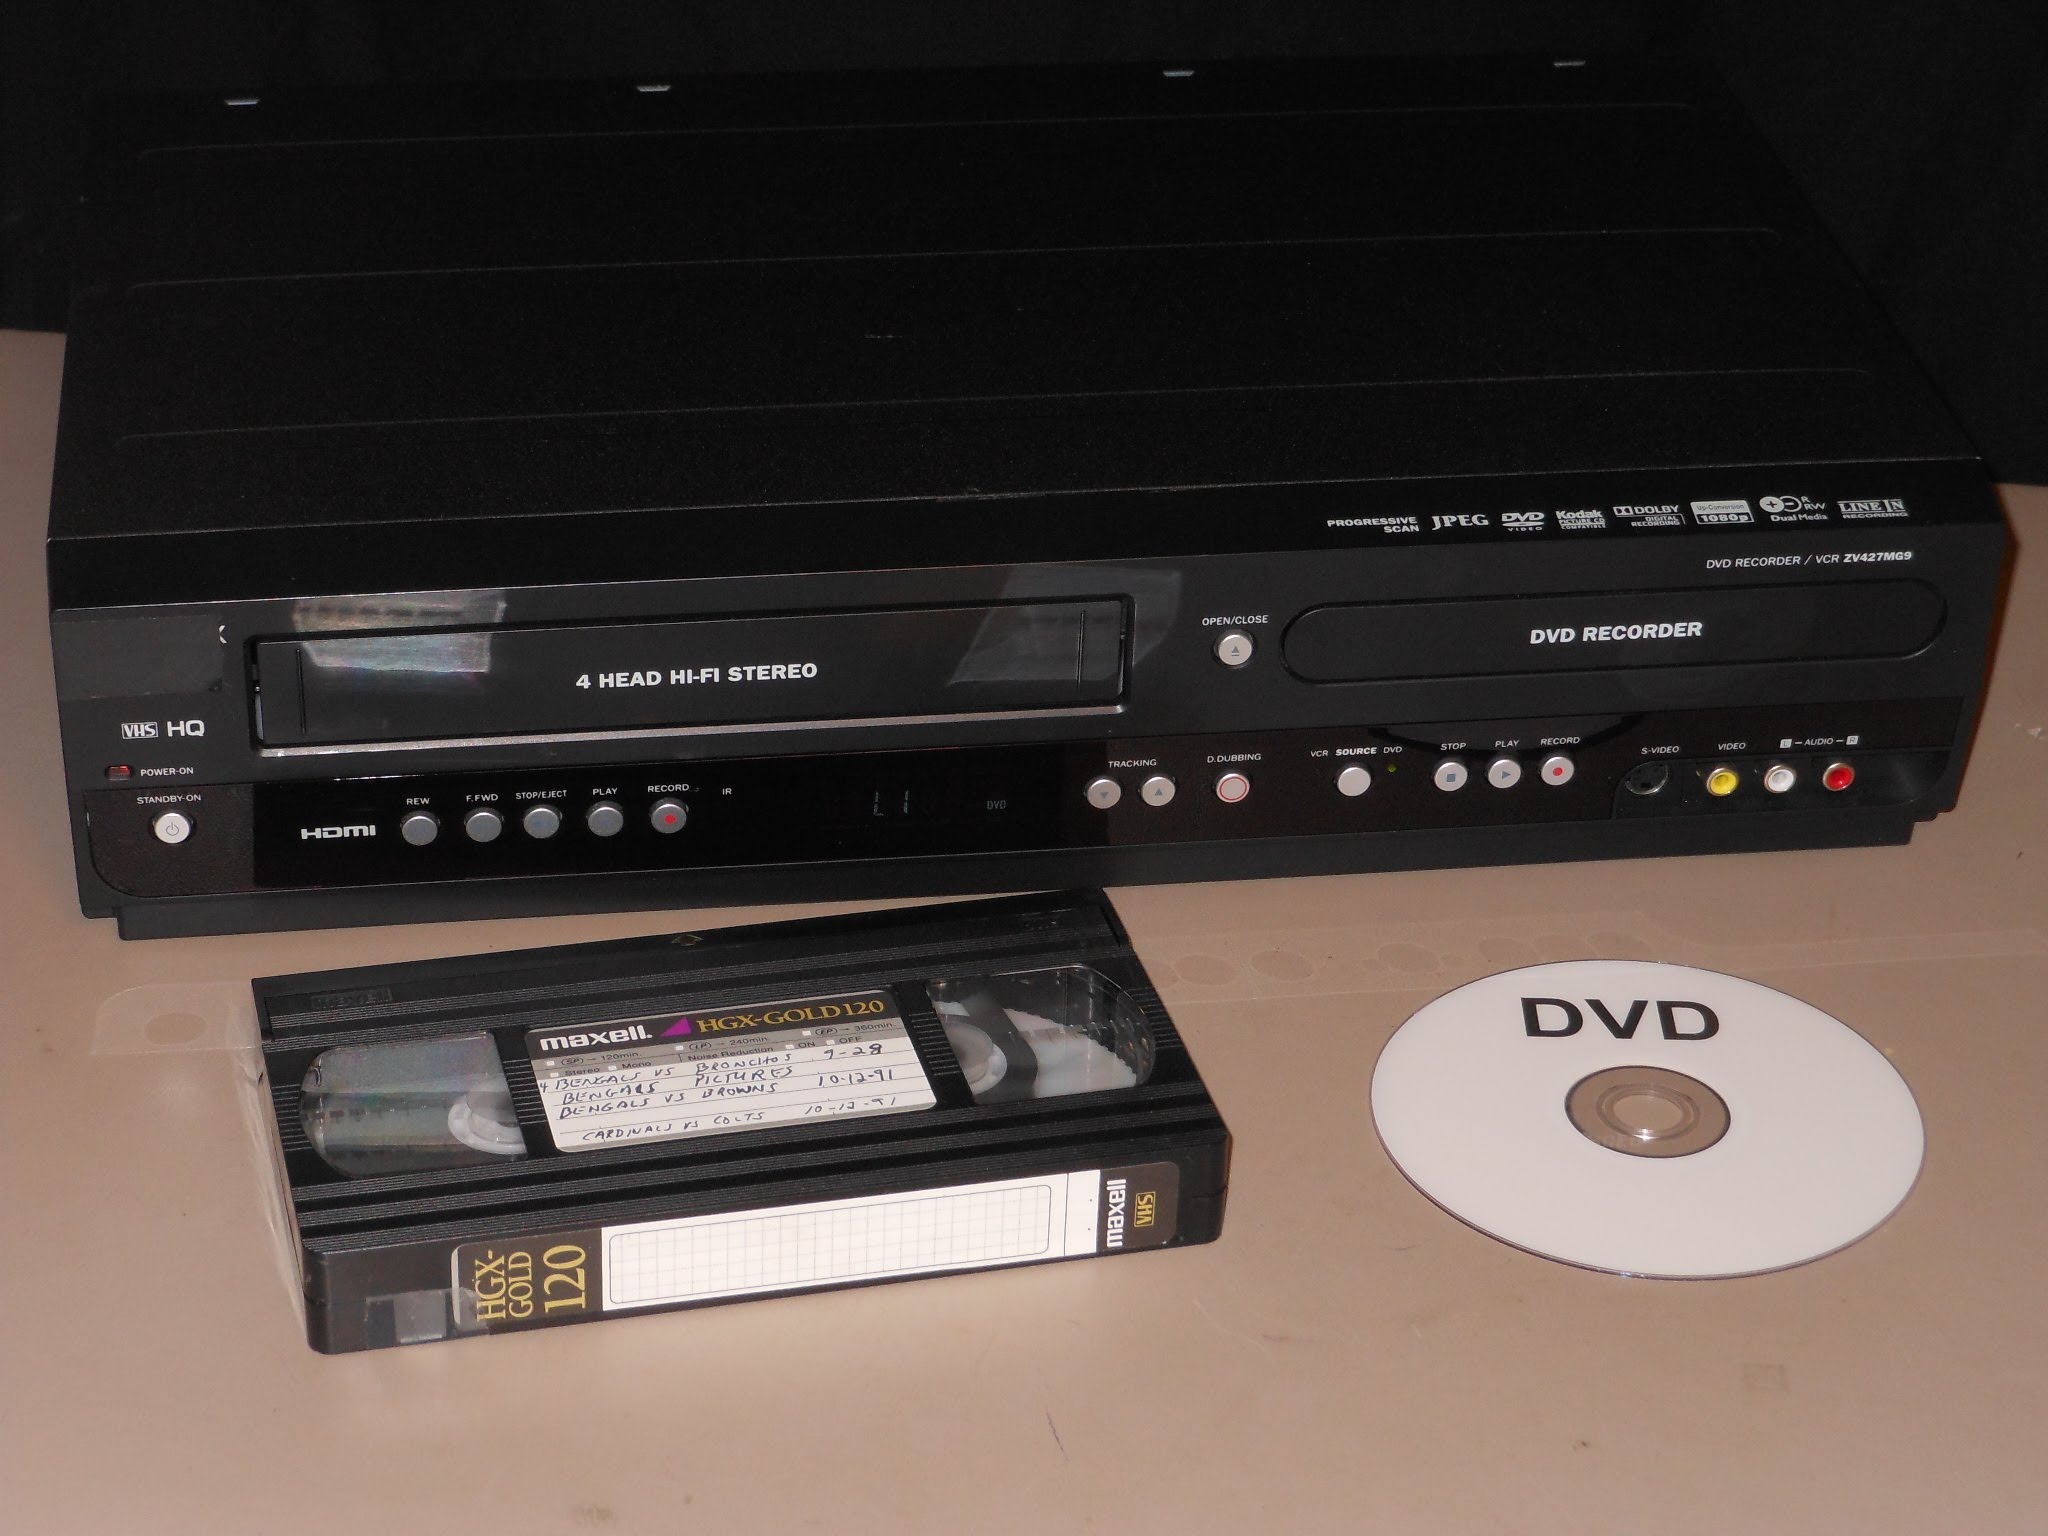 How Can I Record My Vhs Tapes To Dvd - How to